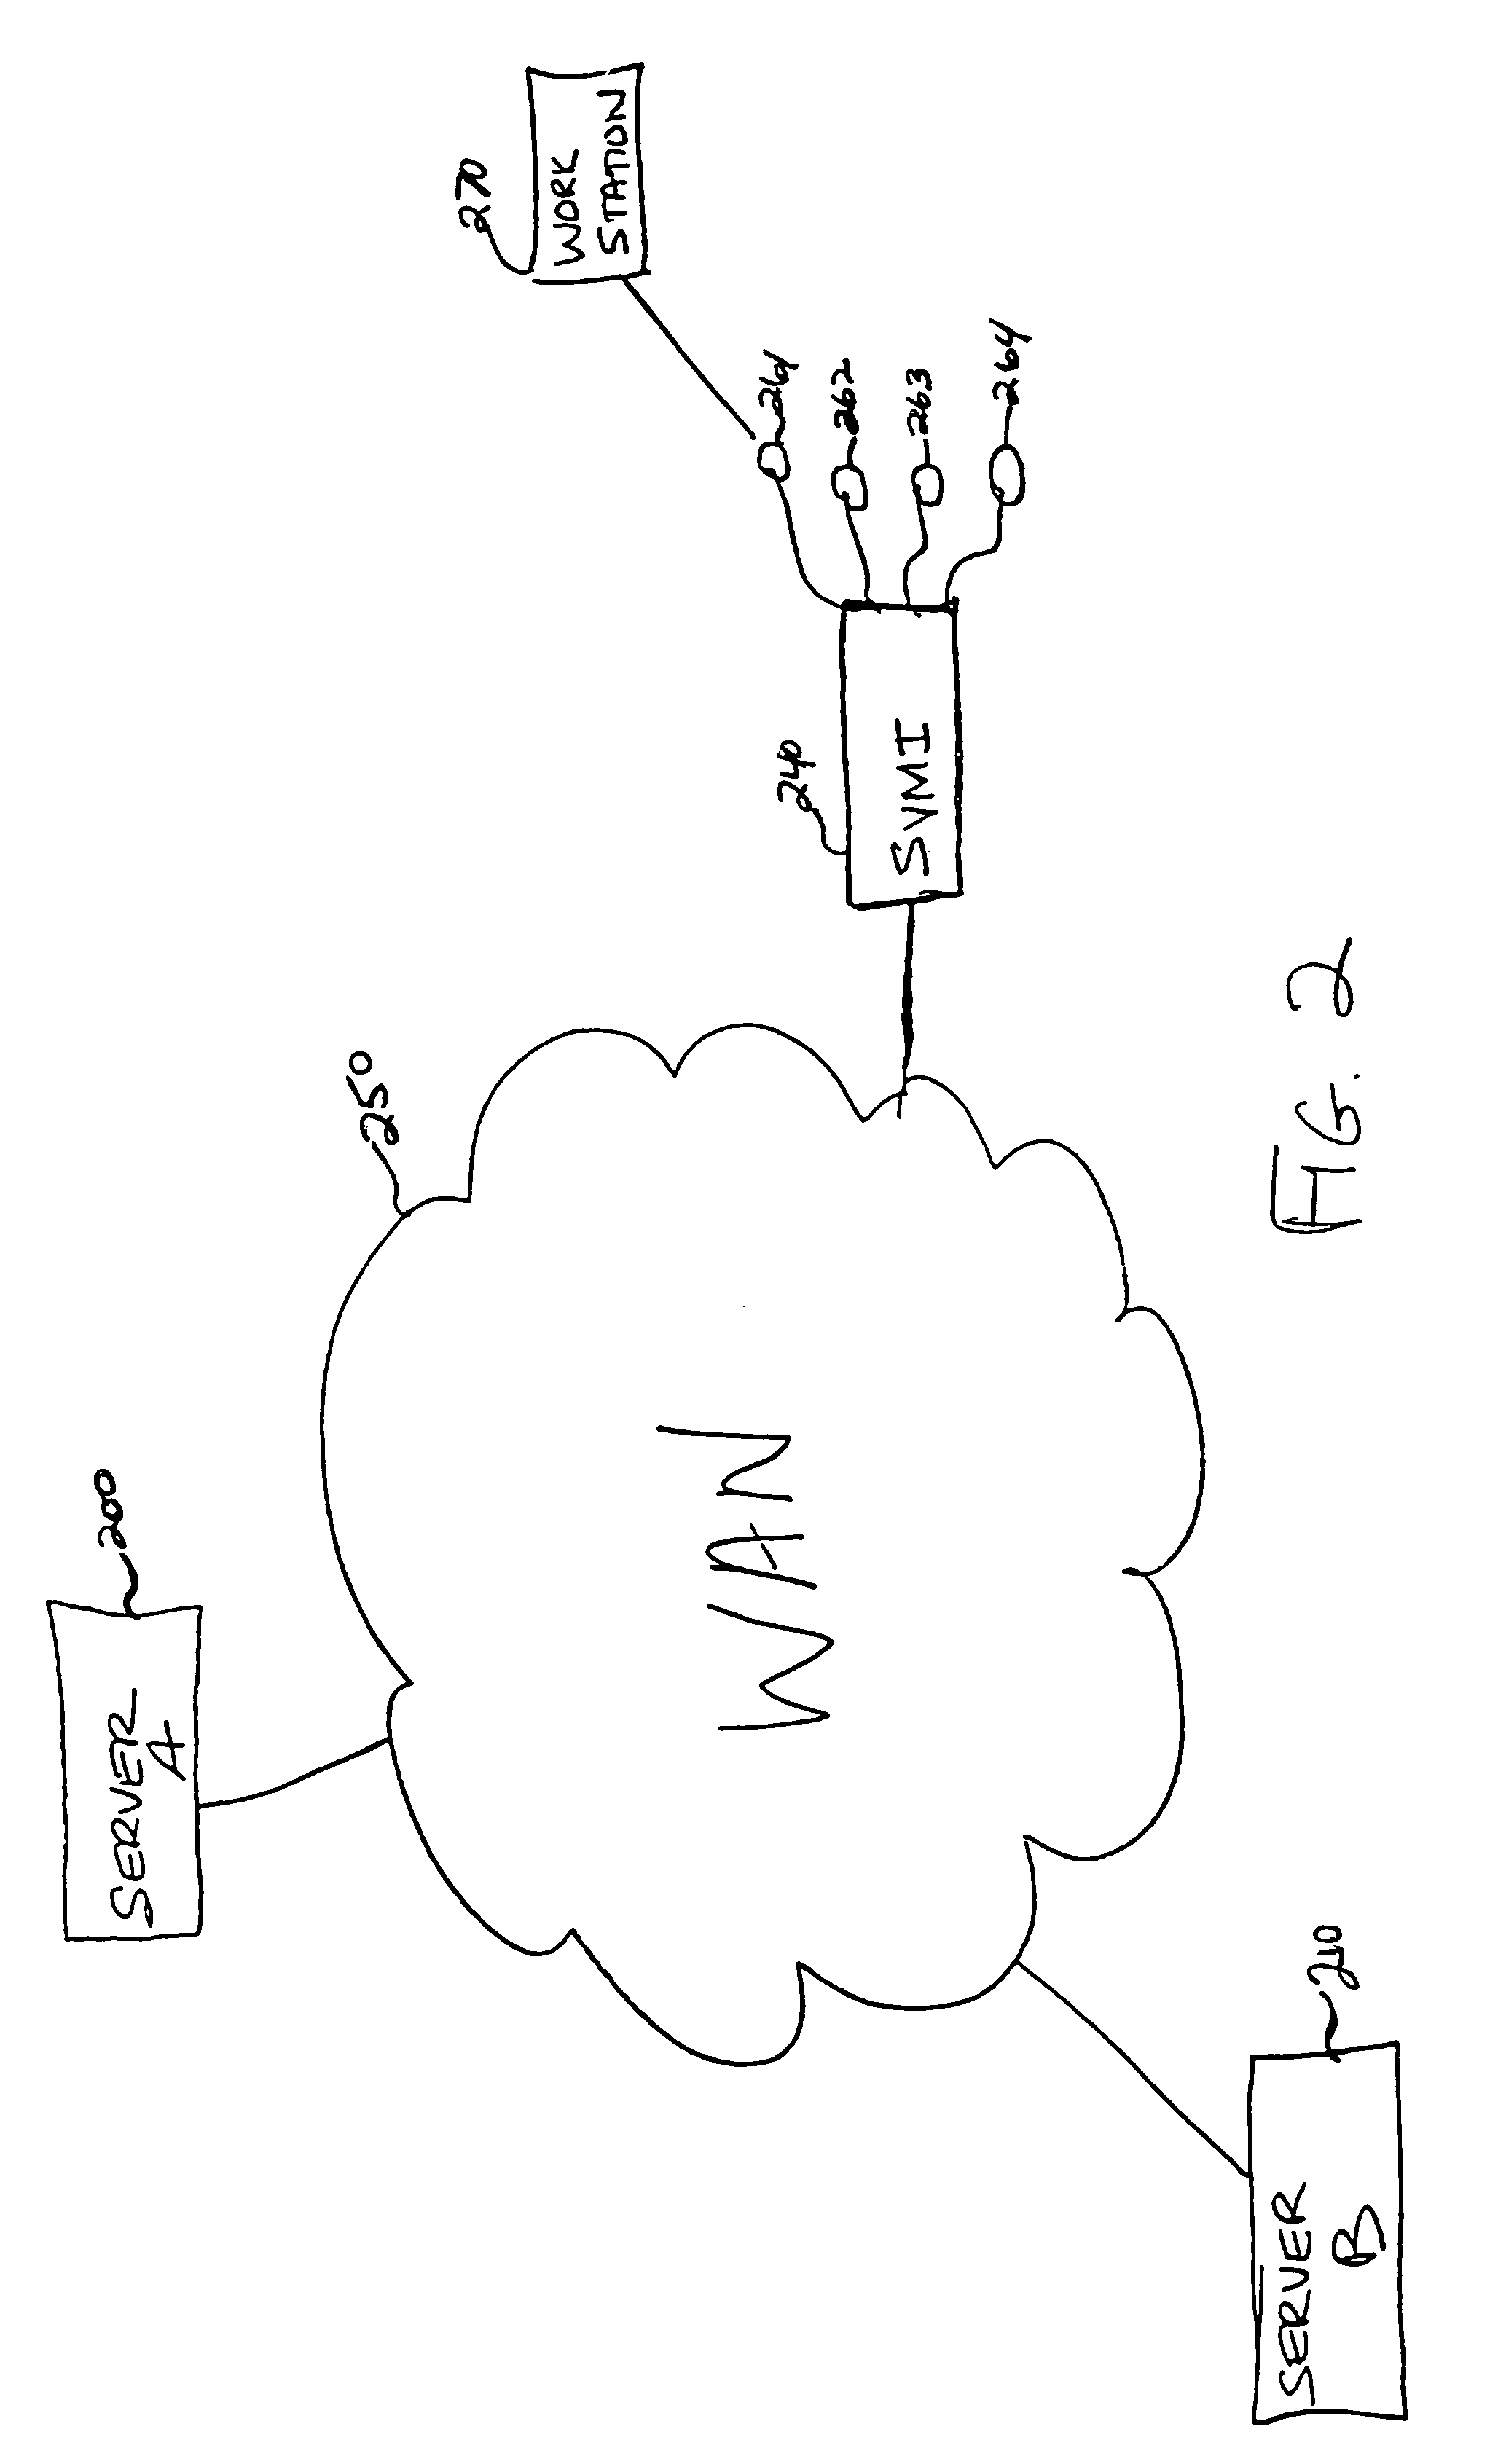 System for securing inbound and outbound data packet flow in a computer network